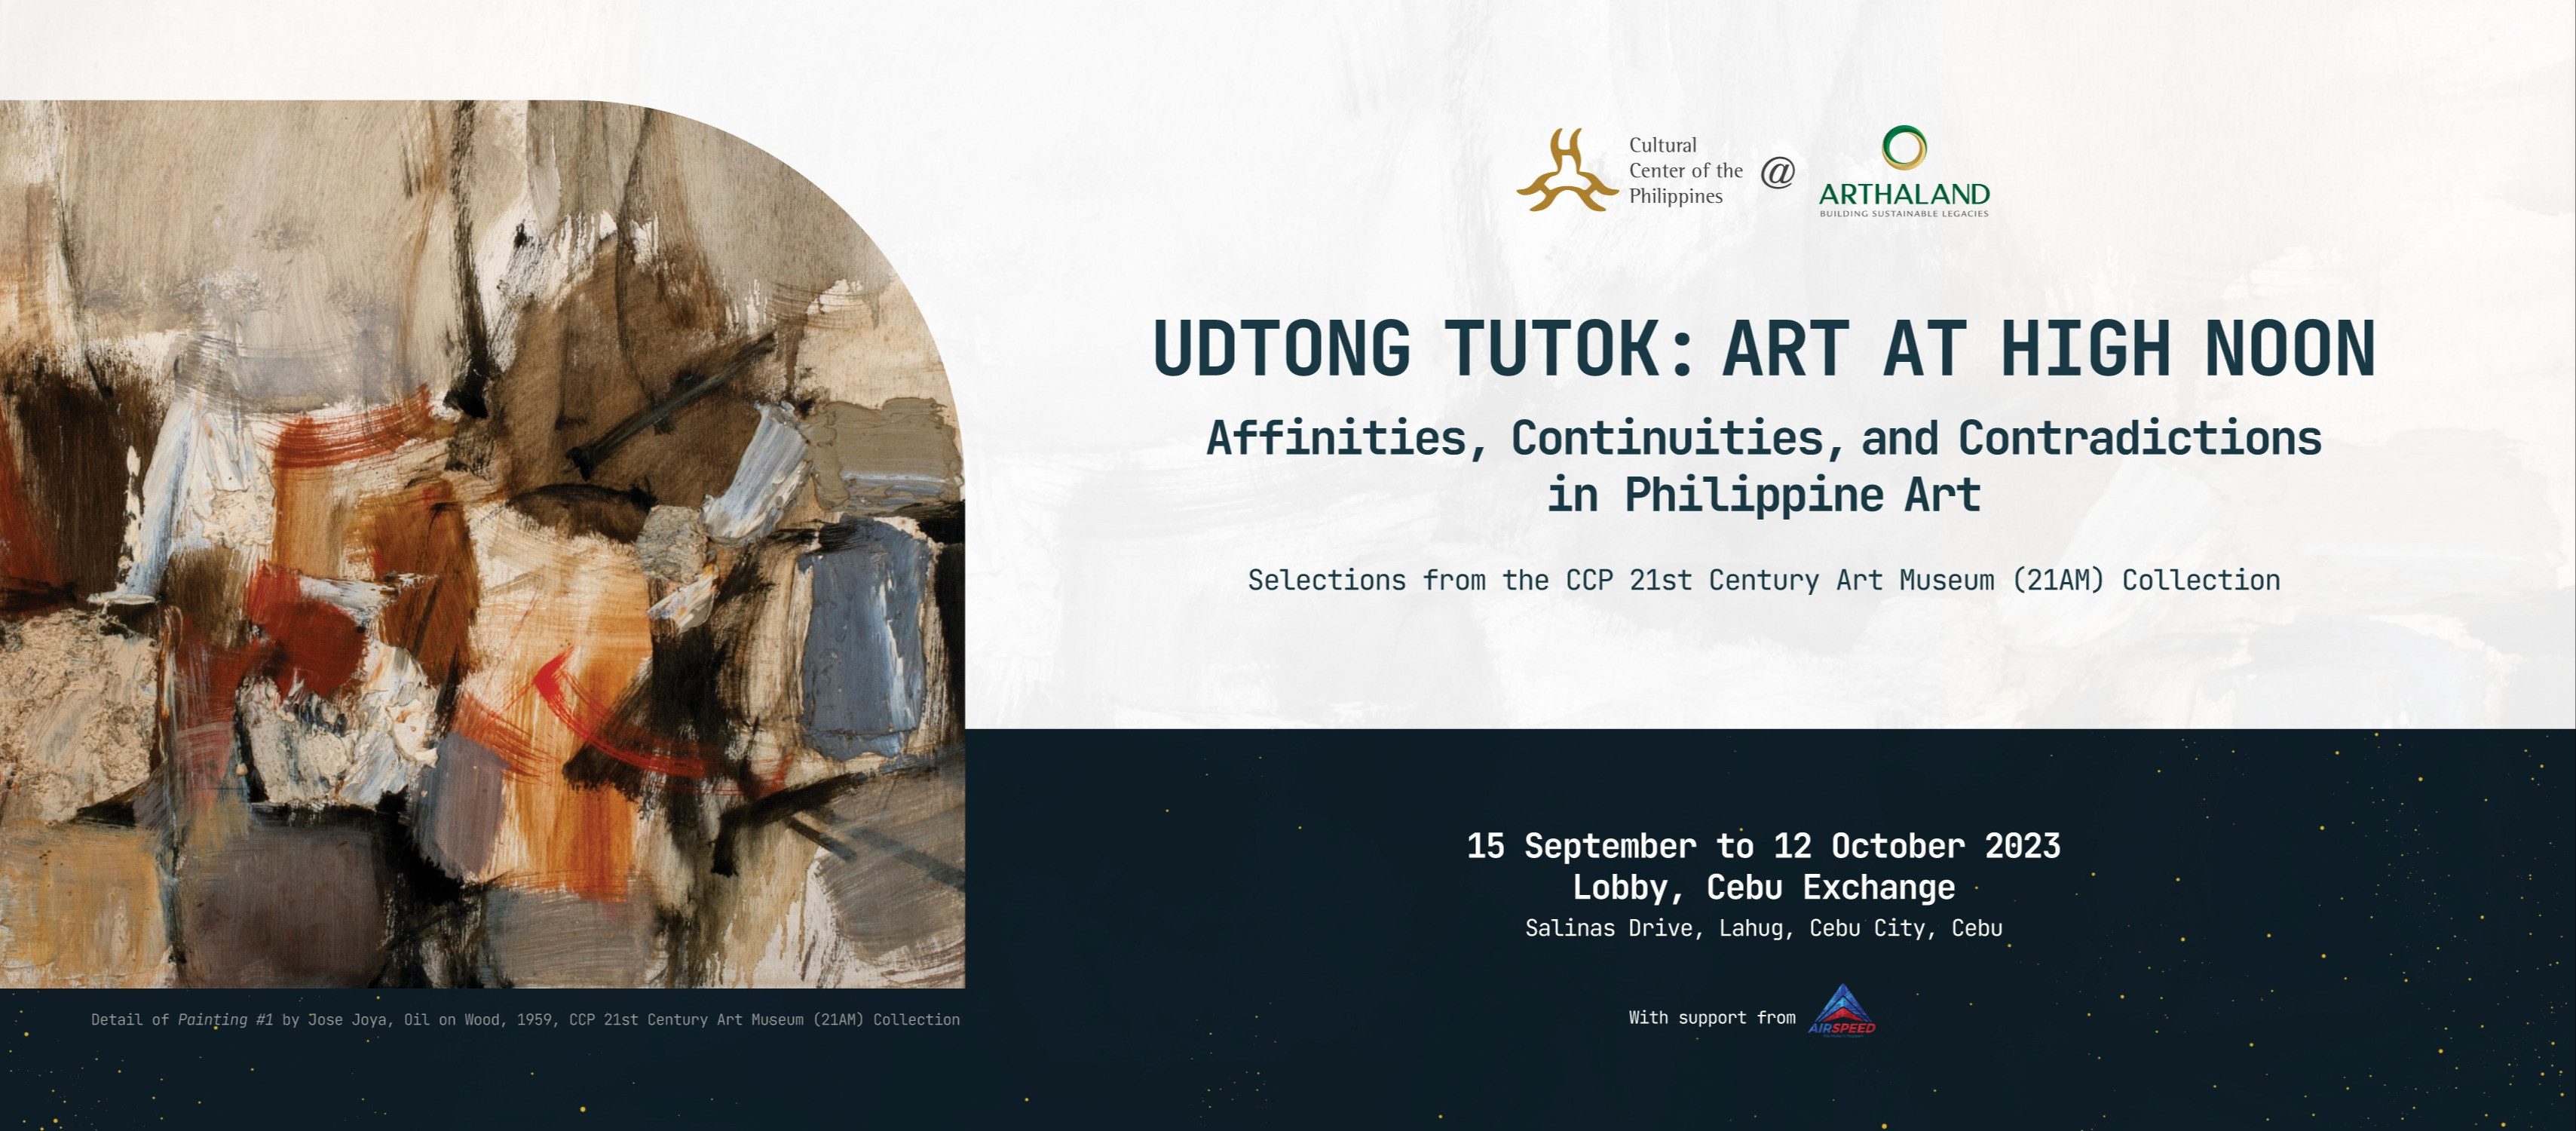 UDTONG TUTOK: ART AT HIGH NOON  Affinities, Continuities, and Contradictions in Philippine Art